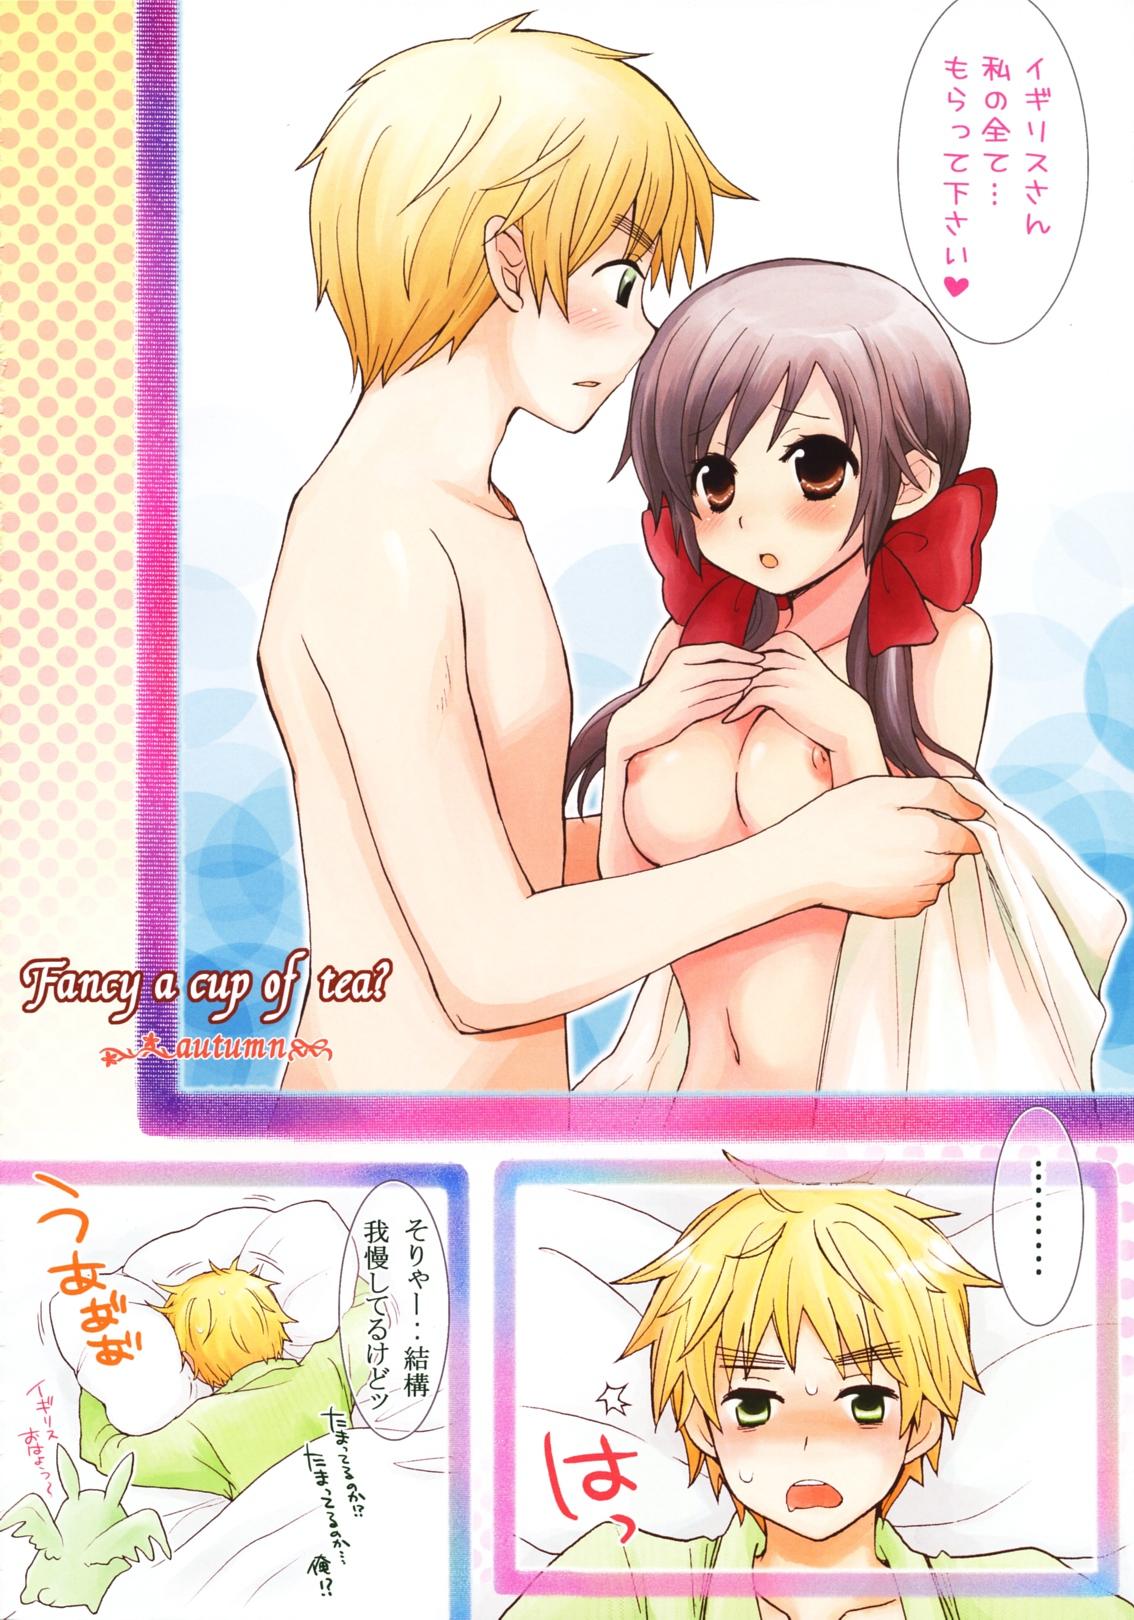 Teens Fancy a cup of tea？ - Axis powers hetalia Tit - Page 3